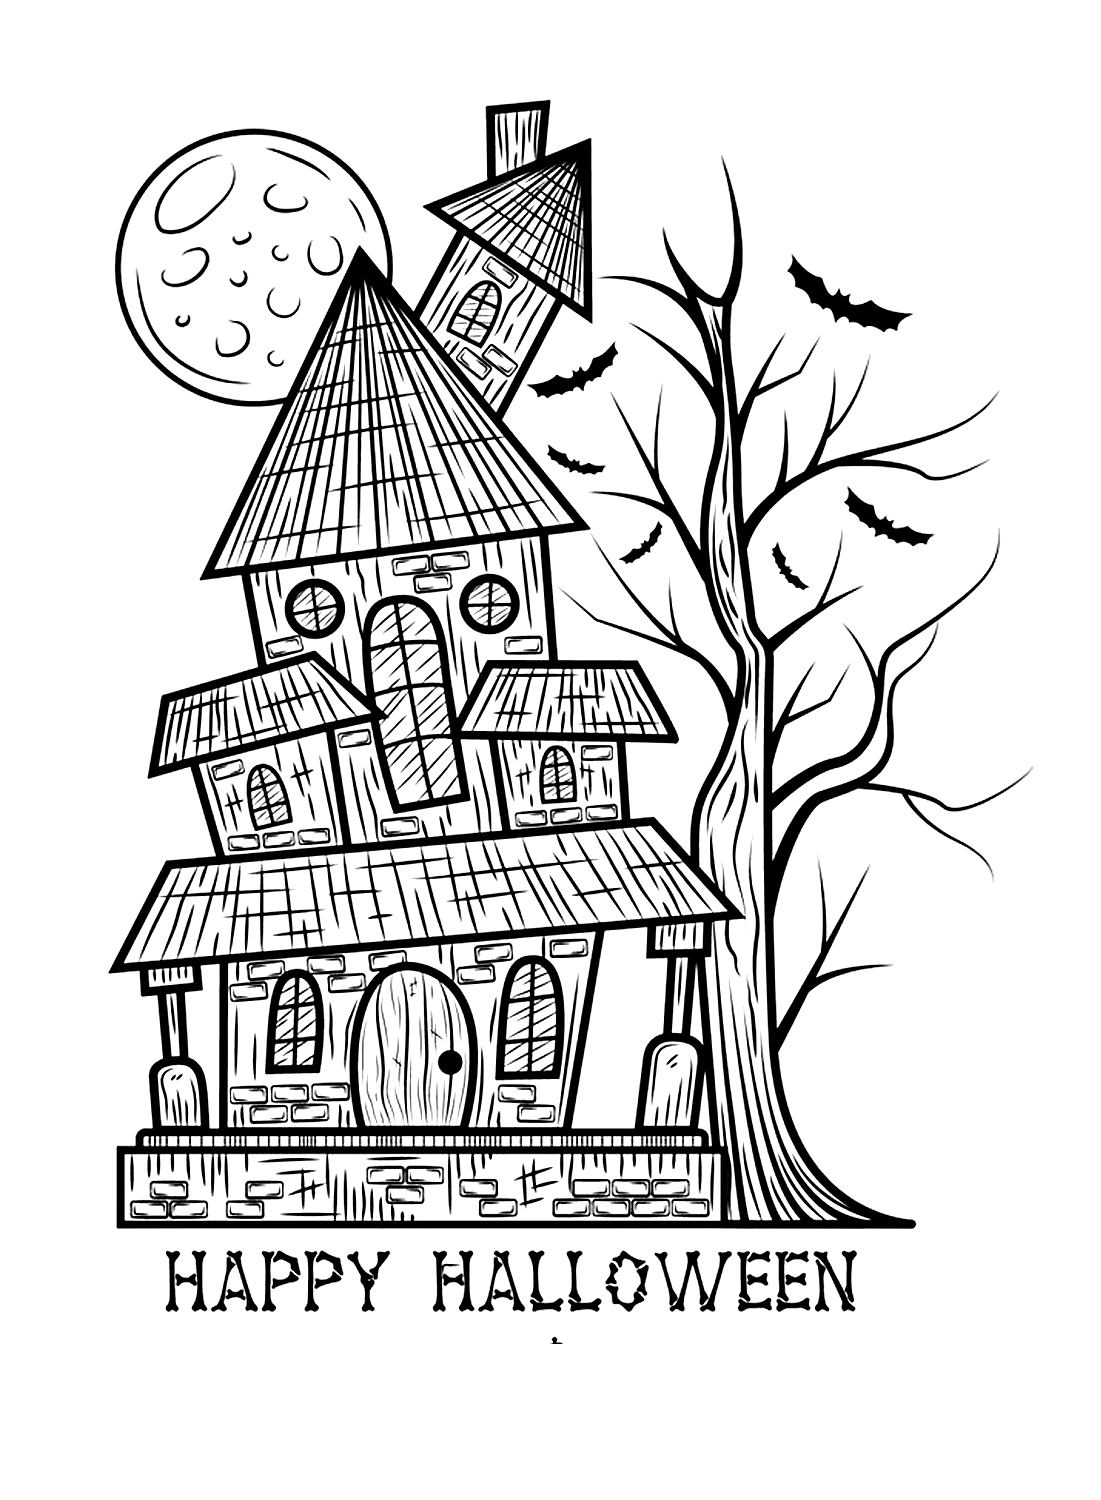 Free haunted house images